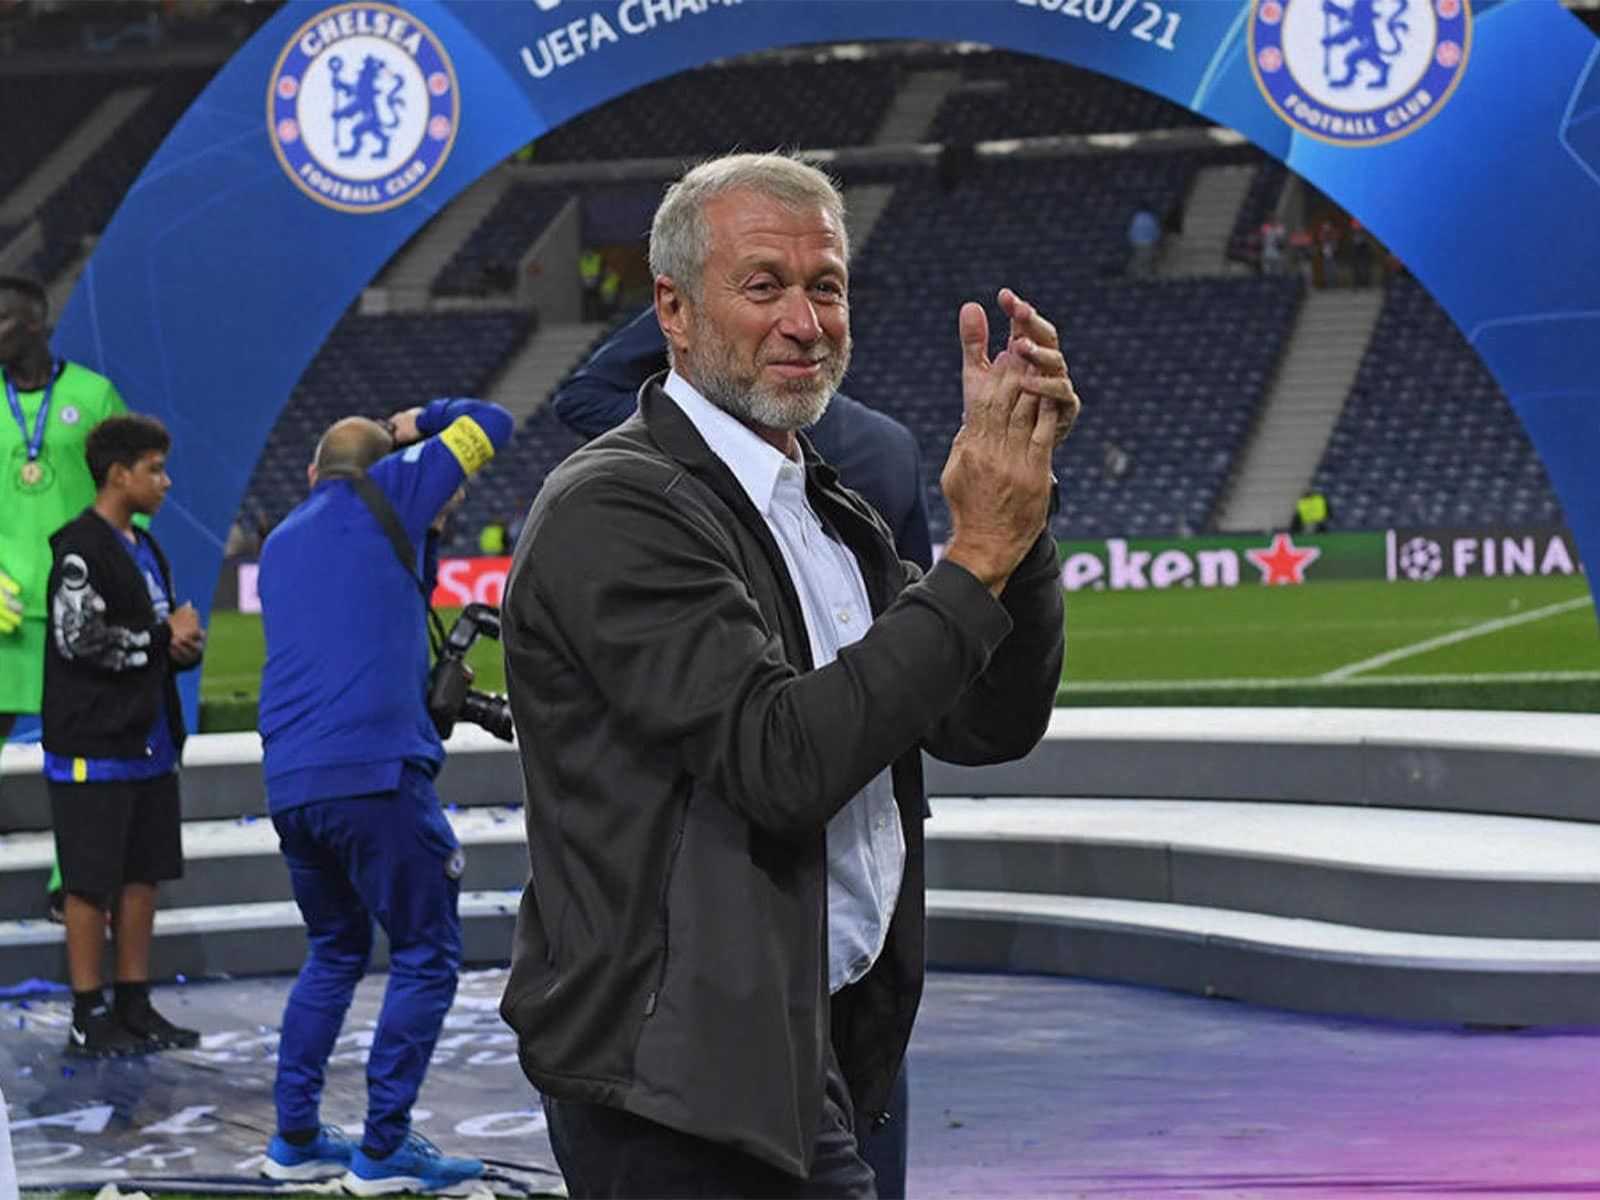 Roman Abramovich puts Chelsea FC up for sale and donates all proceeds to Ukraine